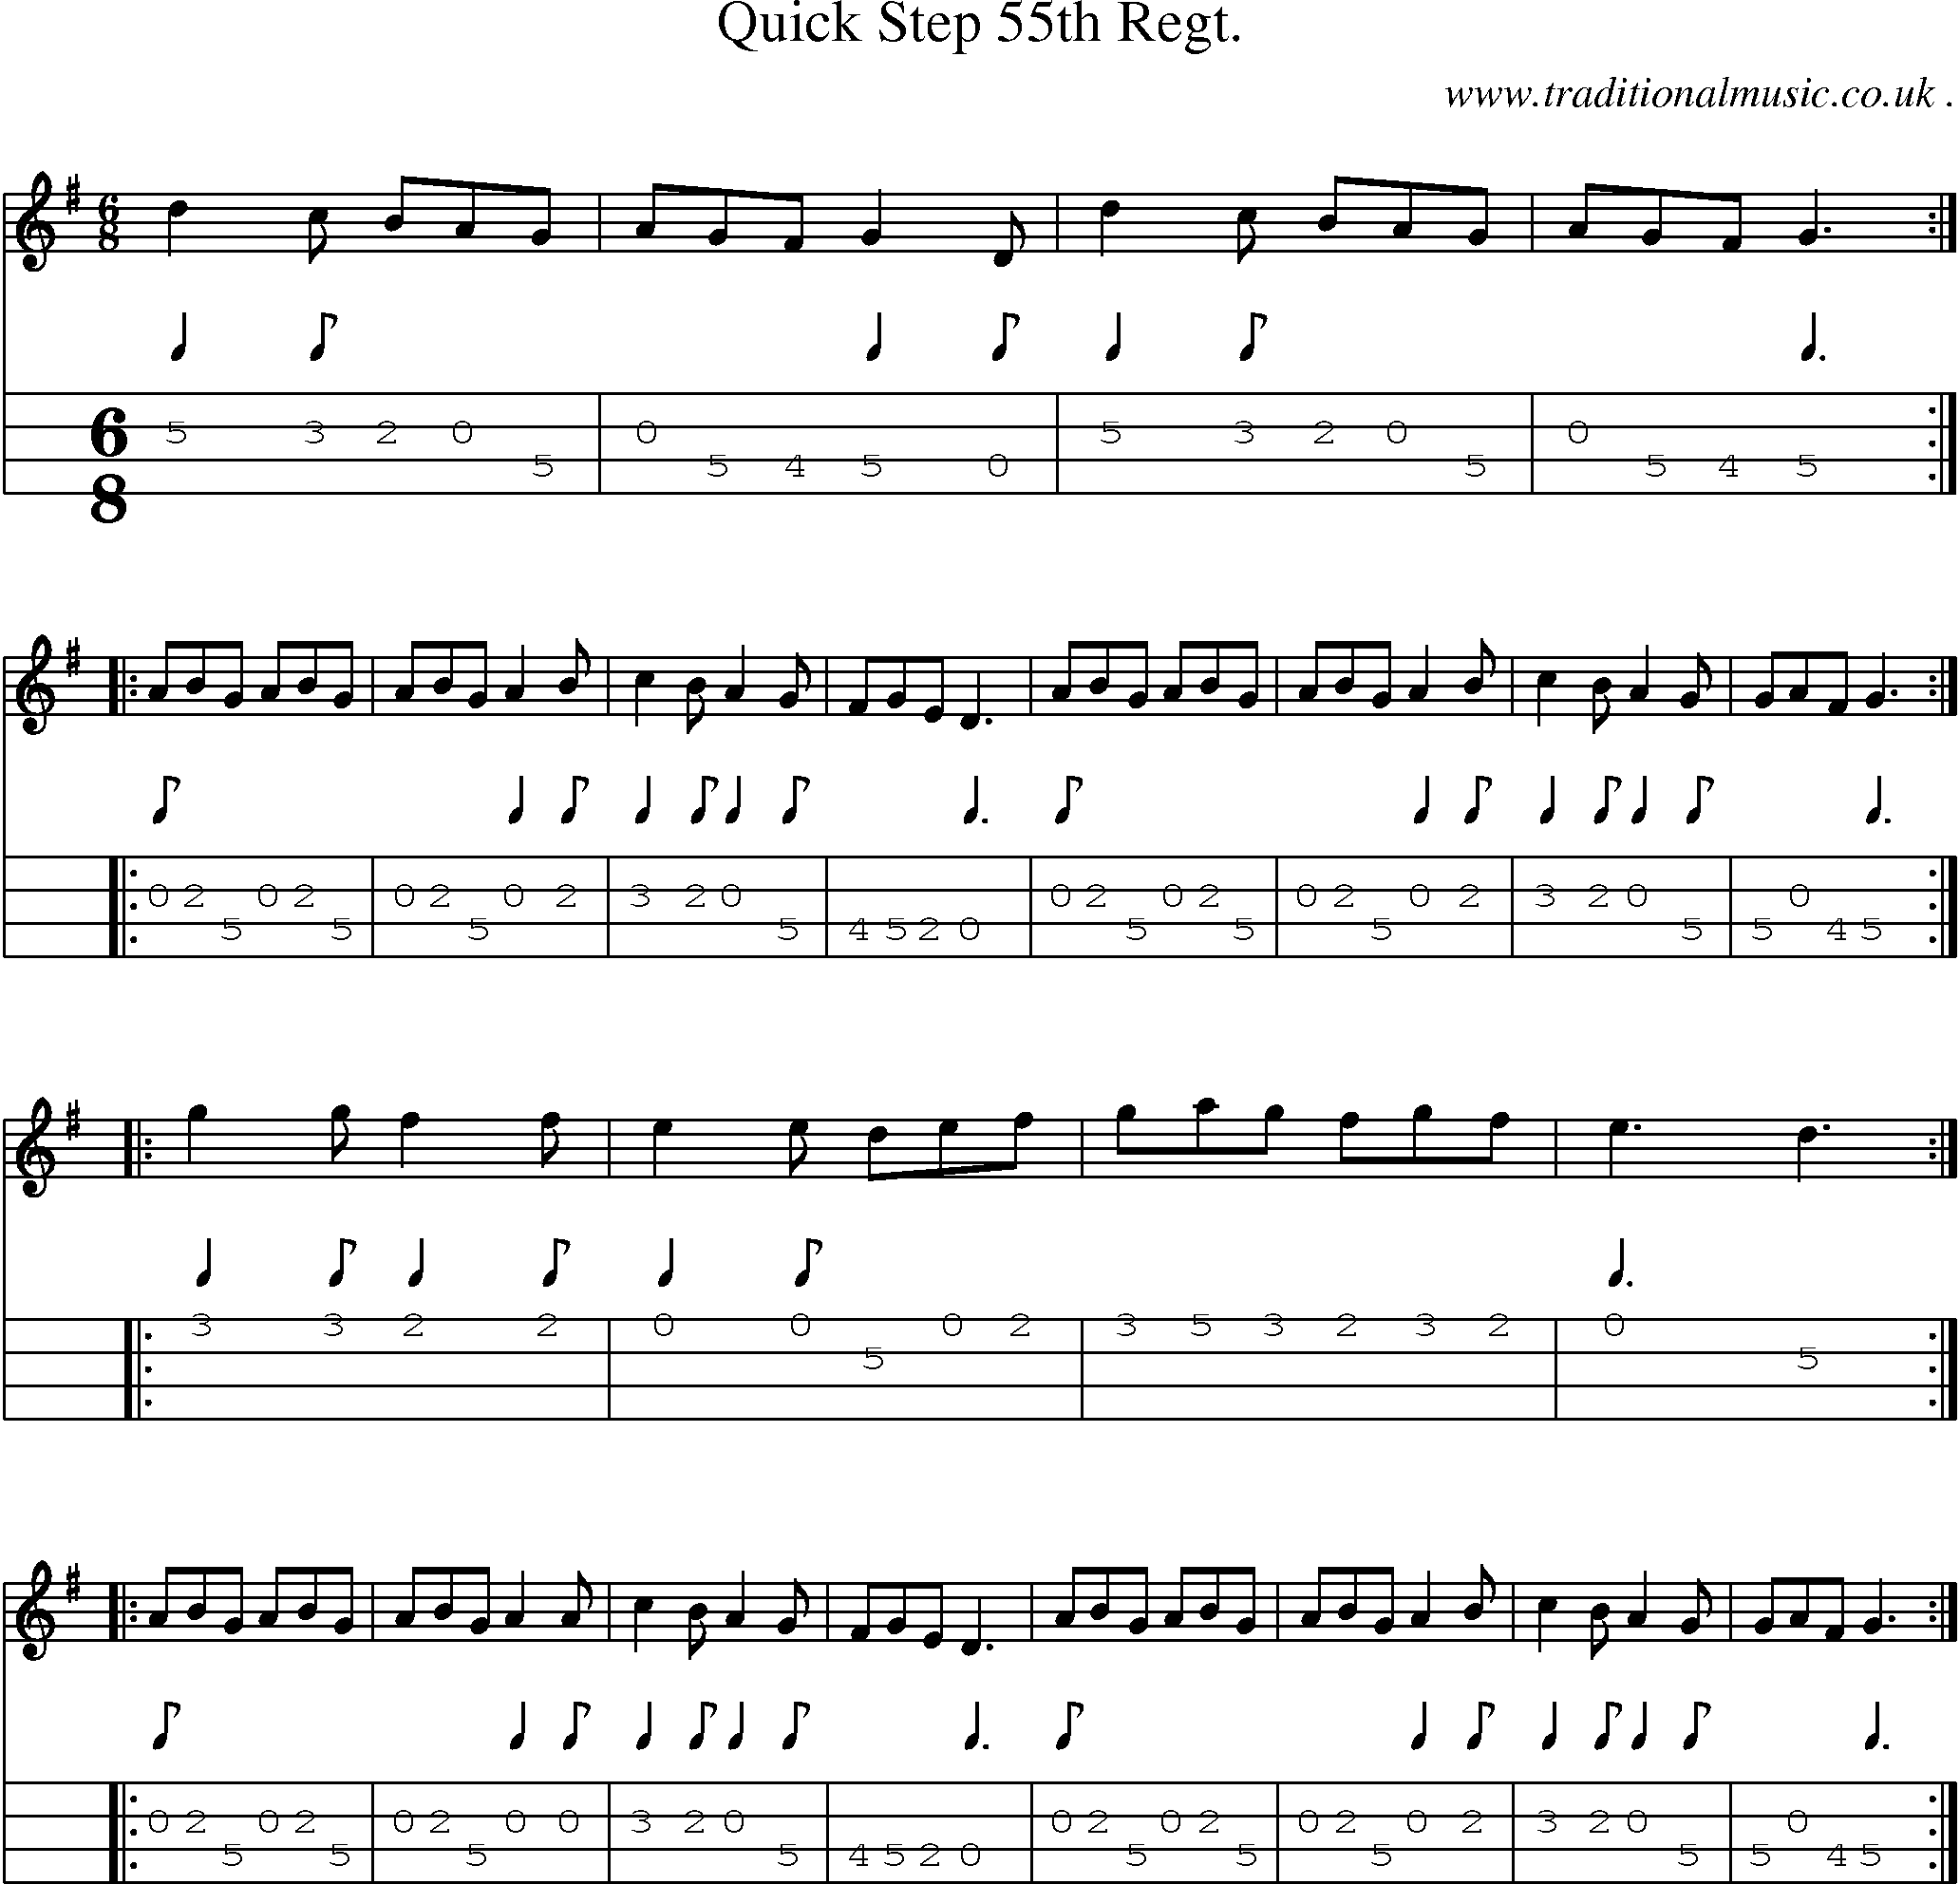 Sheet-music  score, Chords and Mandolin Tabs for Quick Step 55th Regt